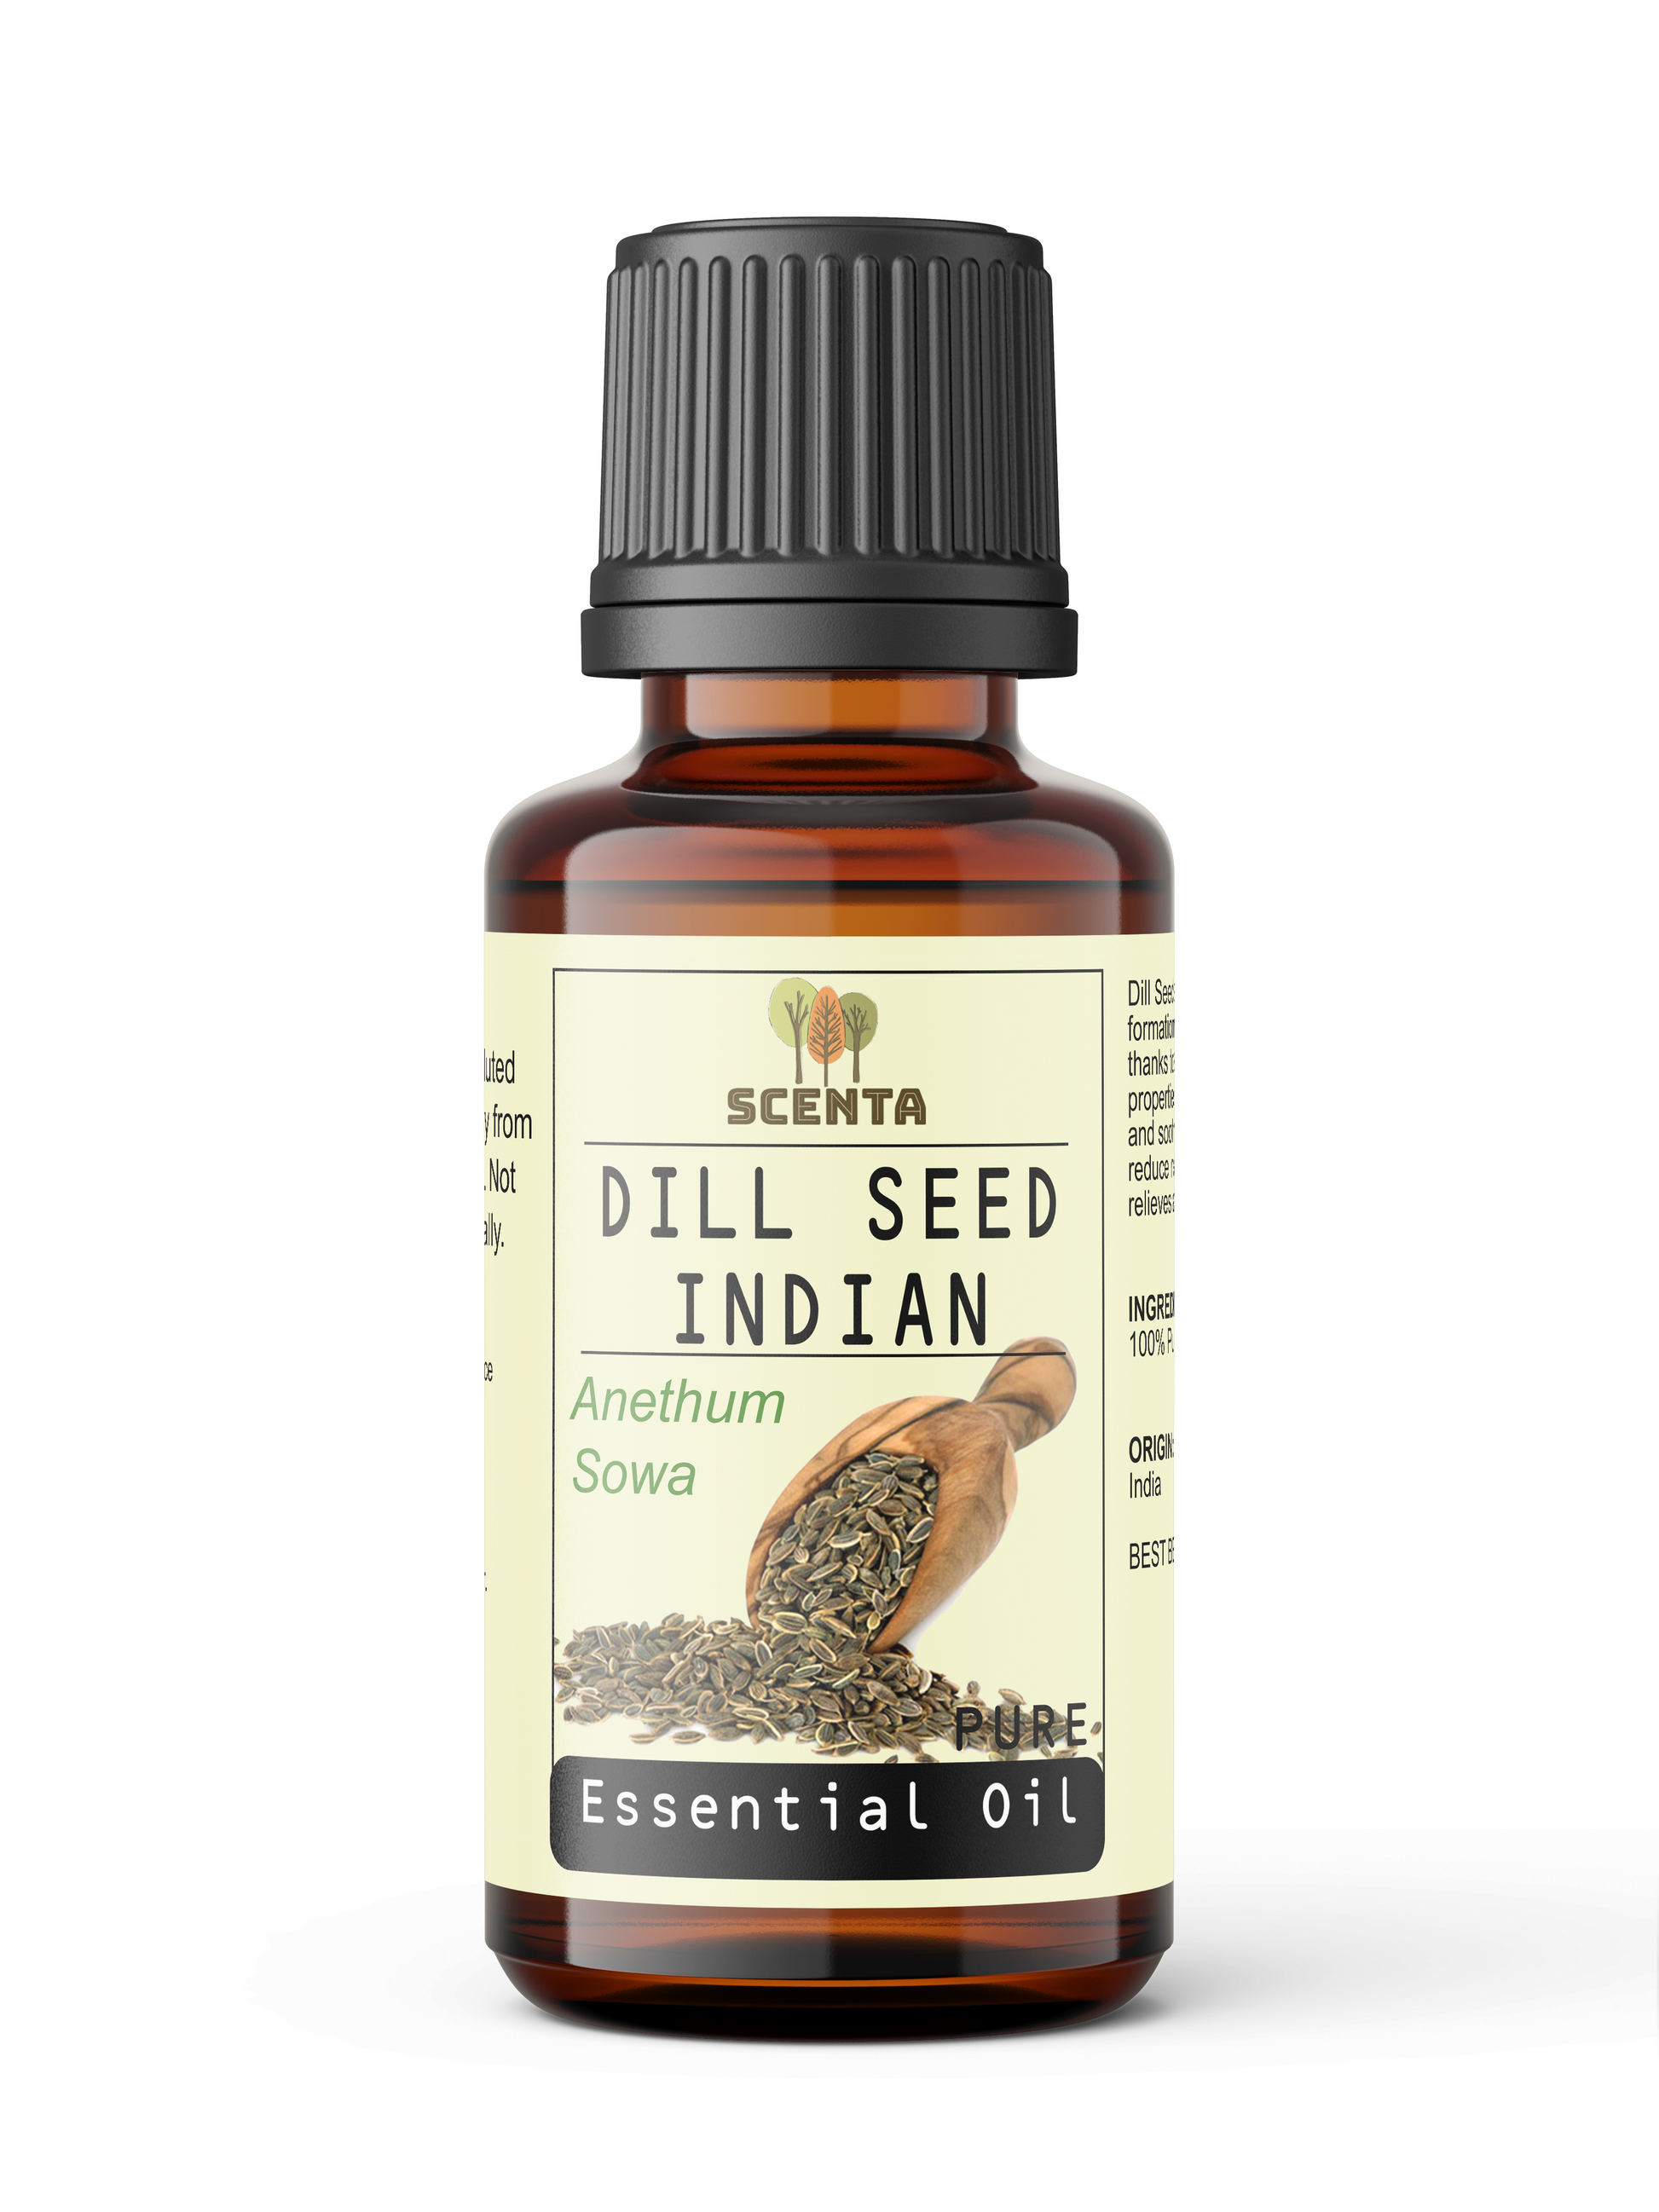 Dill Seed Indian Essential Oil